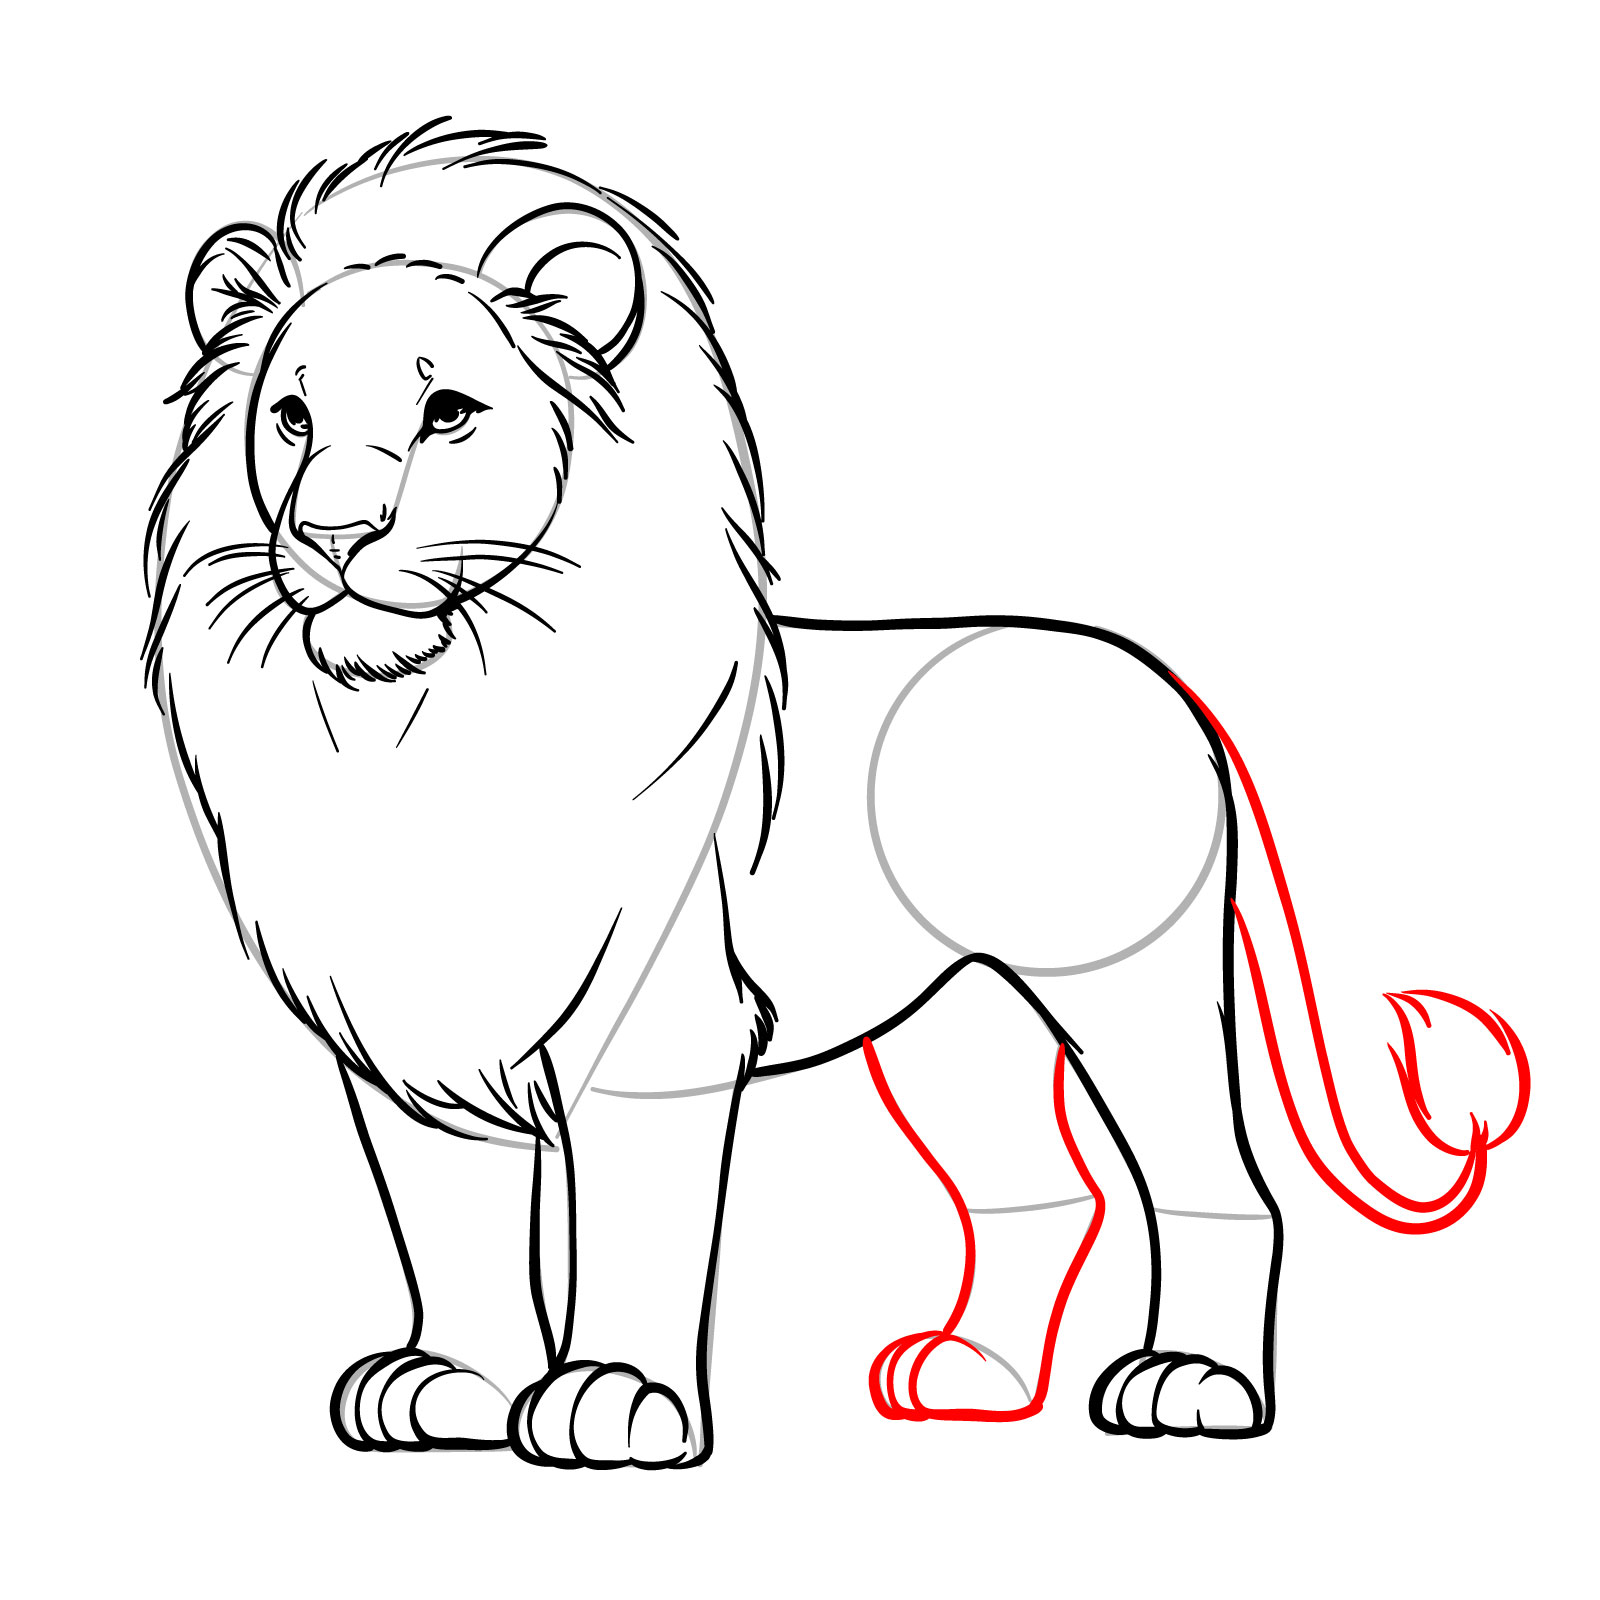 Step-by-step lion drawing of the second rear leg and tail - step 12